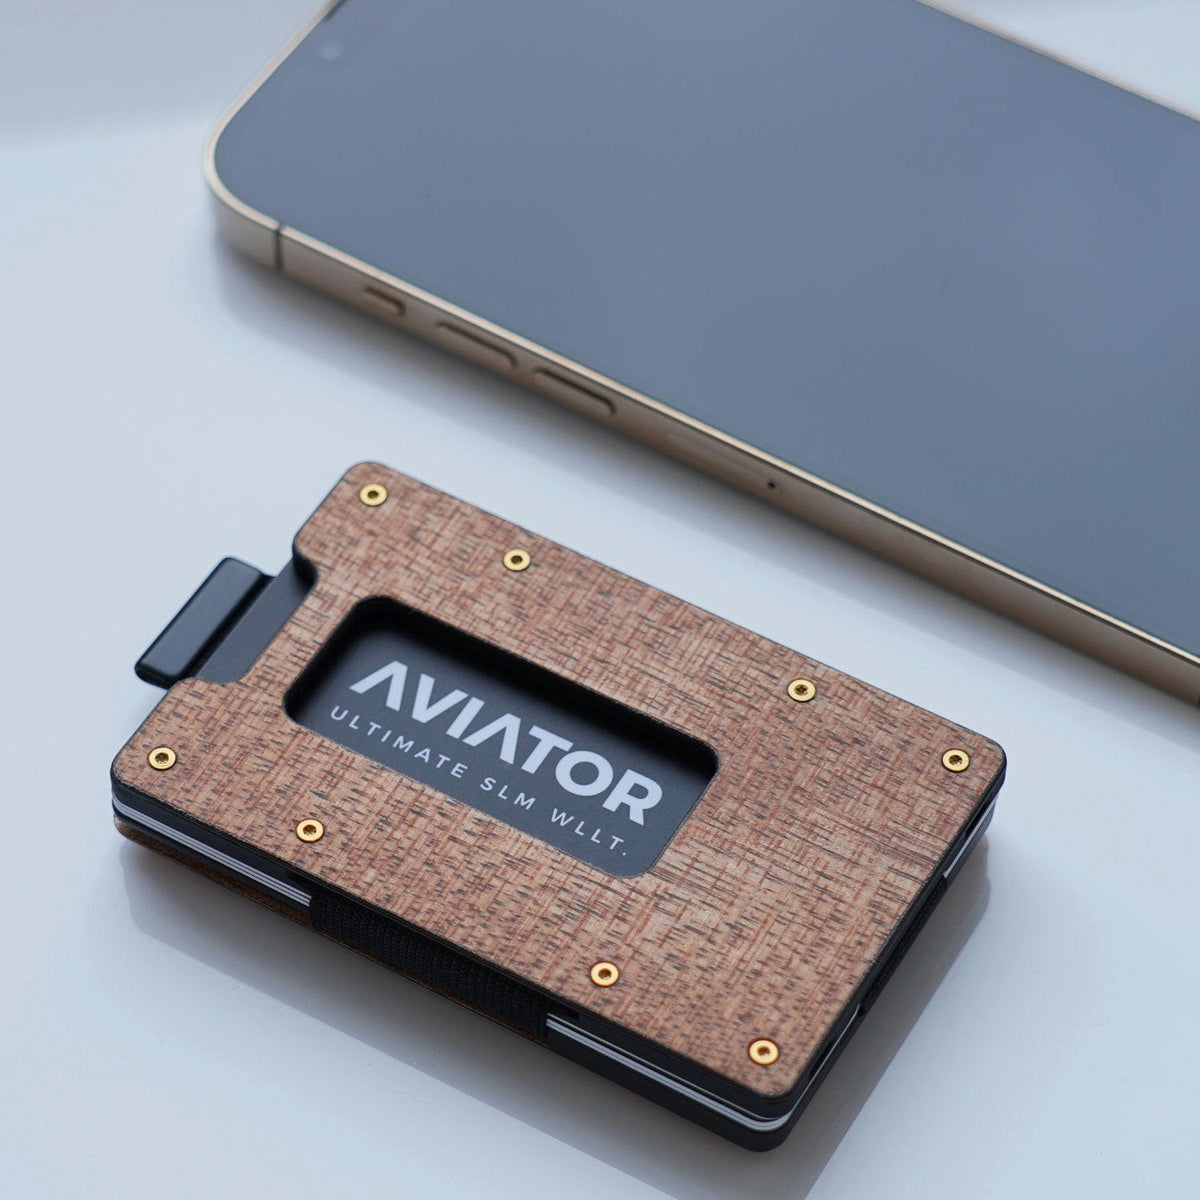 Which Wallet is Best For Your Needs? - AVIATOR by EVERMADE WALLETS